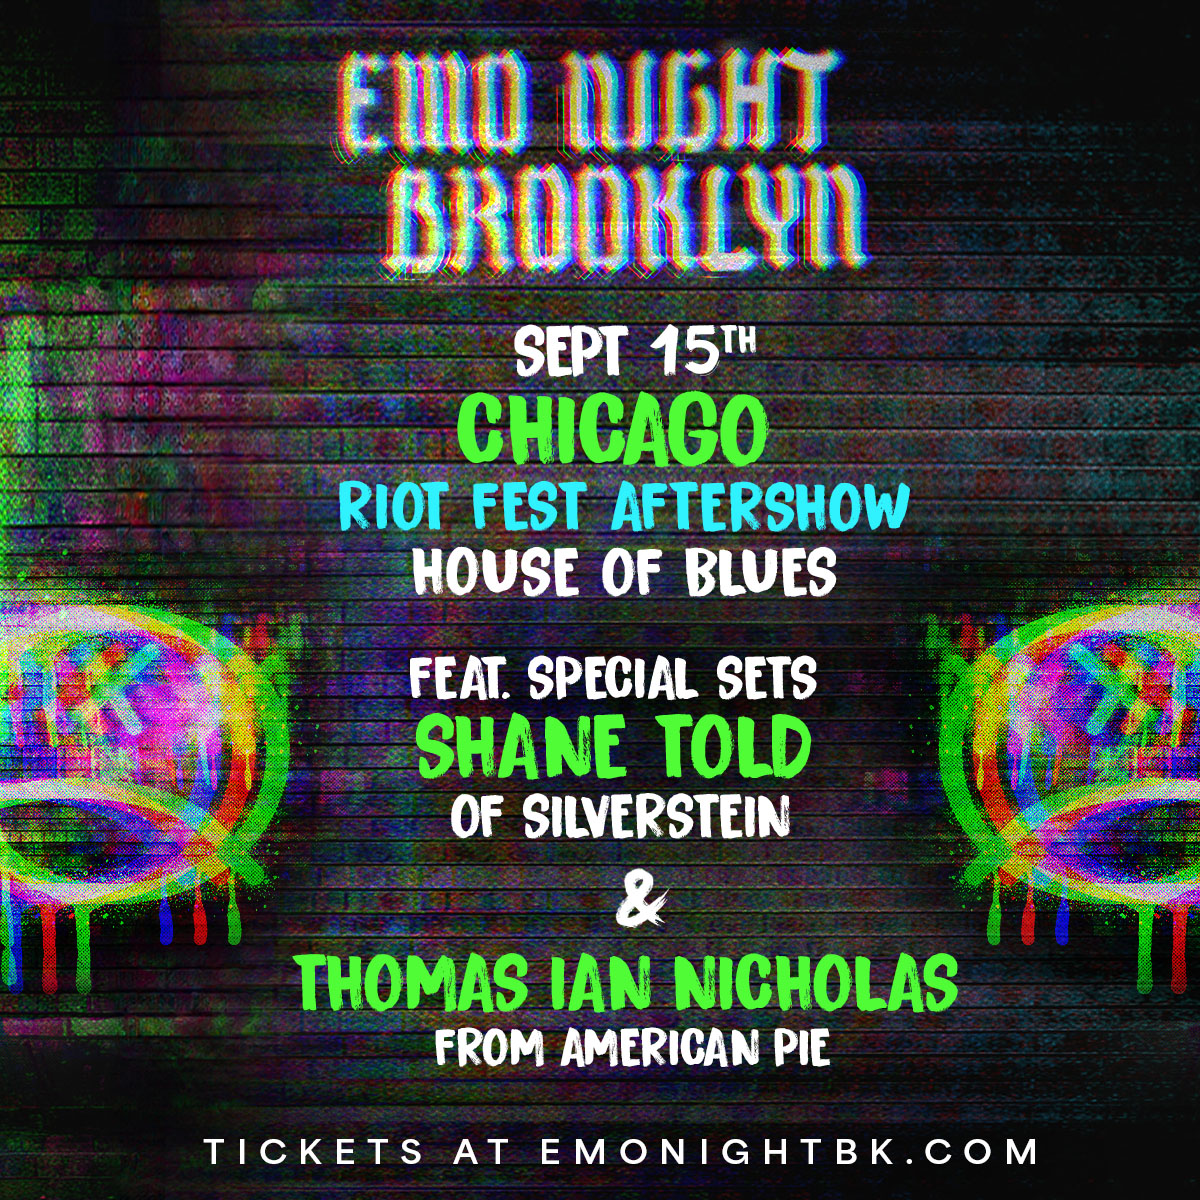 Calling all emos this FRIDAY 🖤 Don't miss the epic @EmoNight_BK @RiotFest afterparty with @shanetold and @TINBand. Tickets on sale now: livemu.sc/44Qe4AK